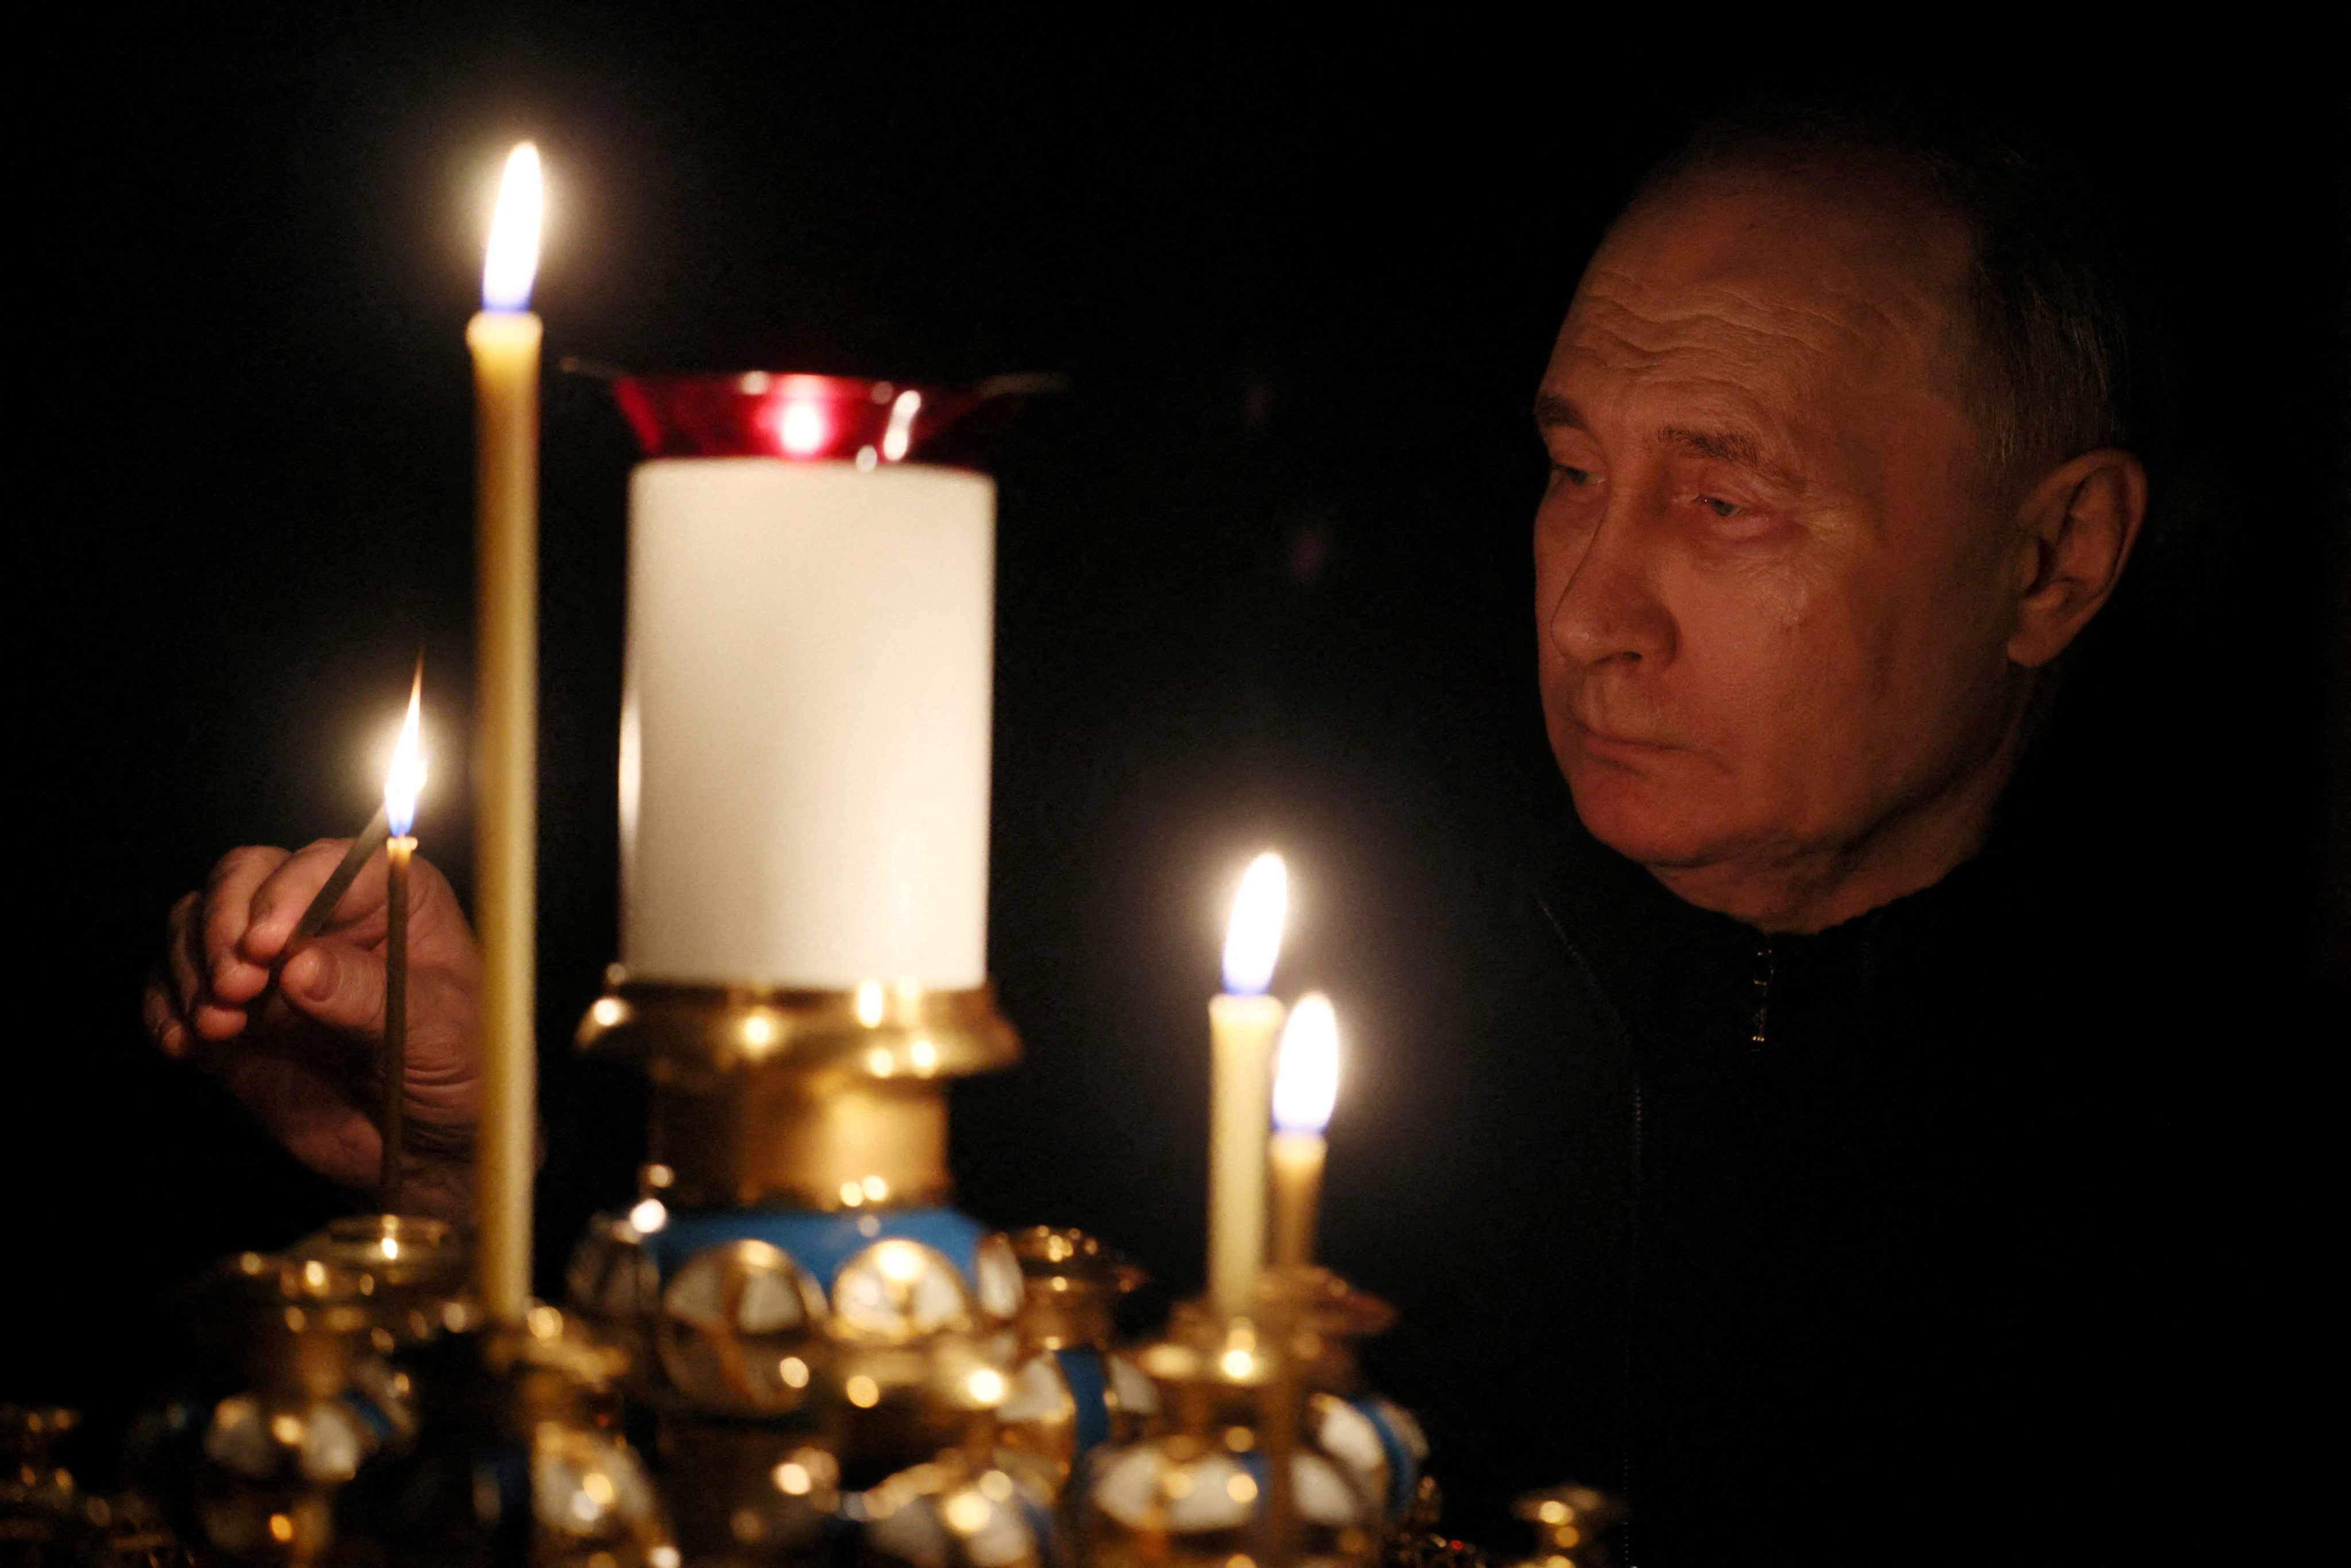 Russian President Vladimir Putin lights a candle in memory of the victims of Friday’s Crocus City Hall attack, at the Novo-Ogaryovo state residence outside Moscow on Sunday. Photo: Sputnik/Mikhail Metzel / Pool via Reuters